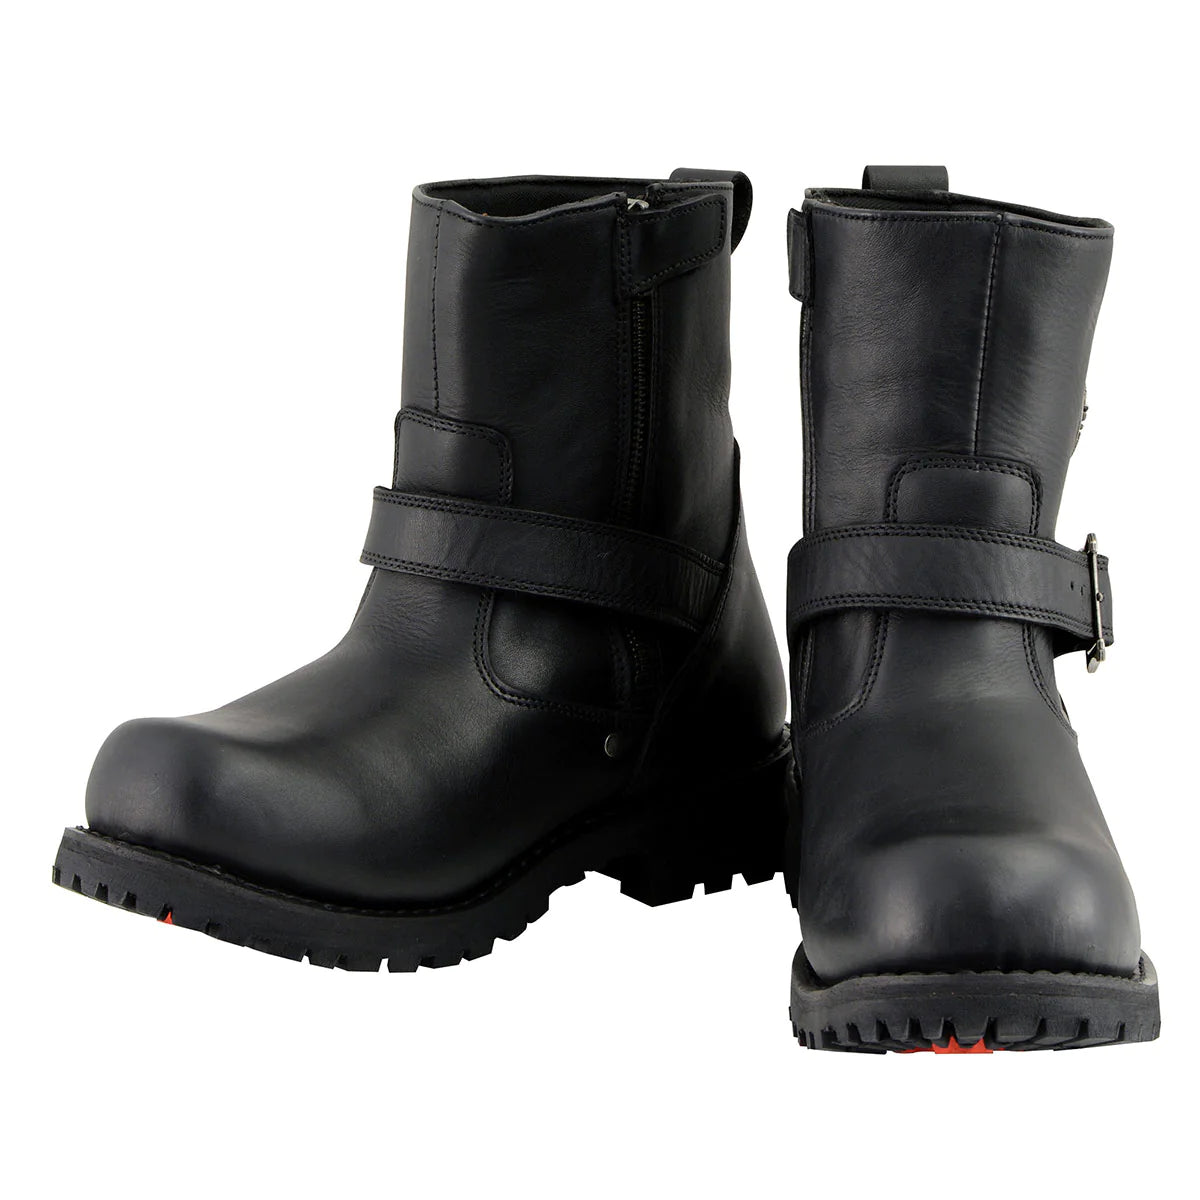 Men's Black 6-inch Classic Engineer Boots with Side Zipper